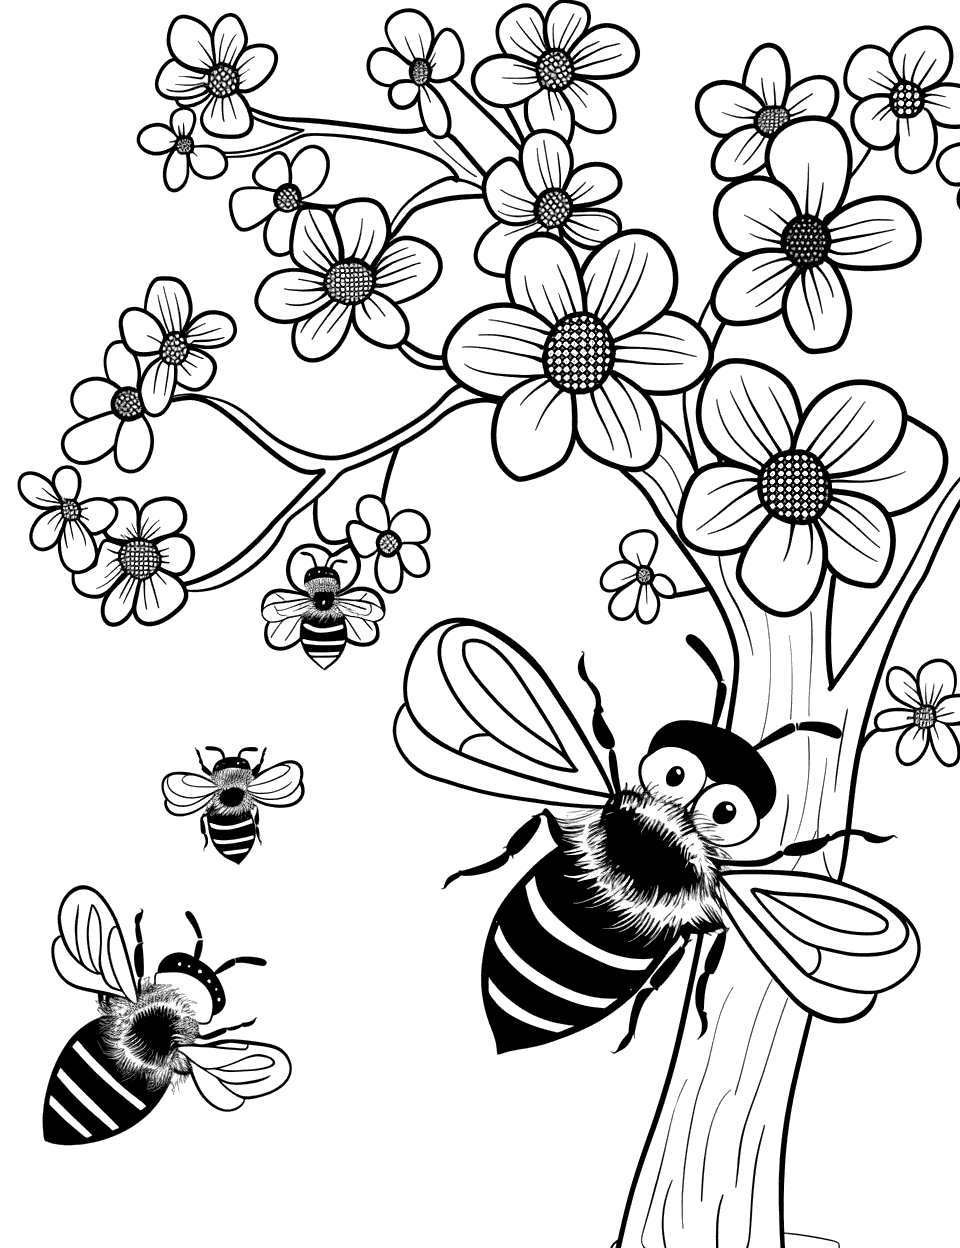 Spring Bees and Blossoms Bee Coloring Page - Multiple bees buzzing around spring blossoms on a tree.